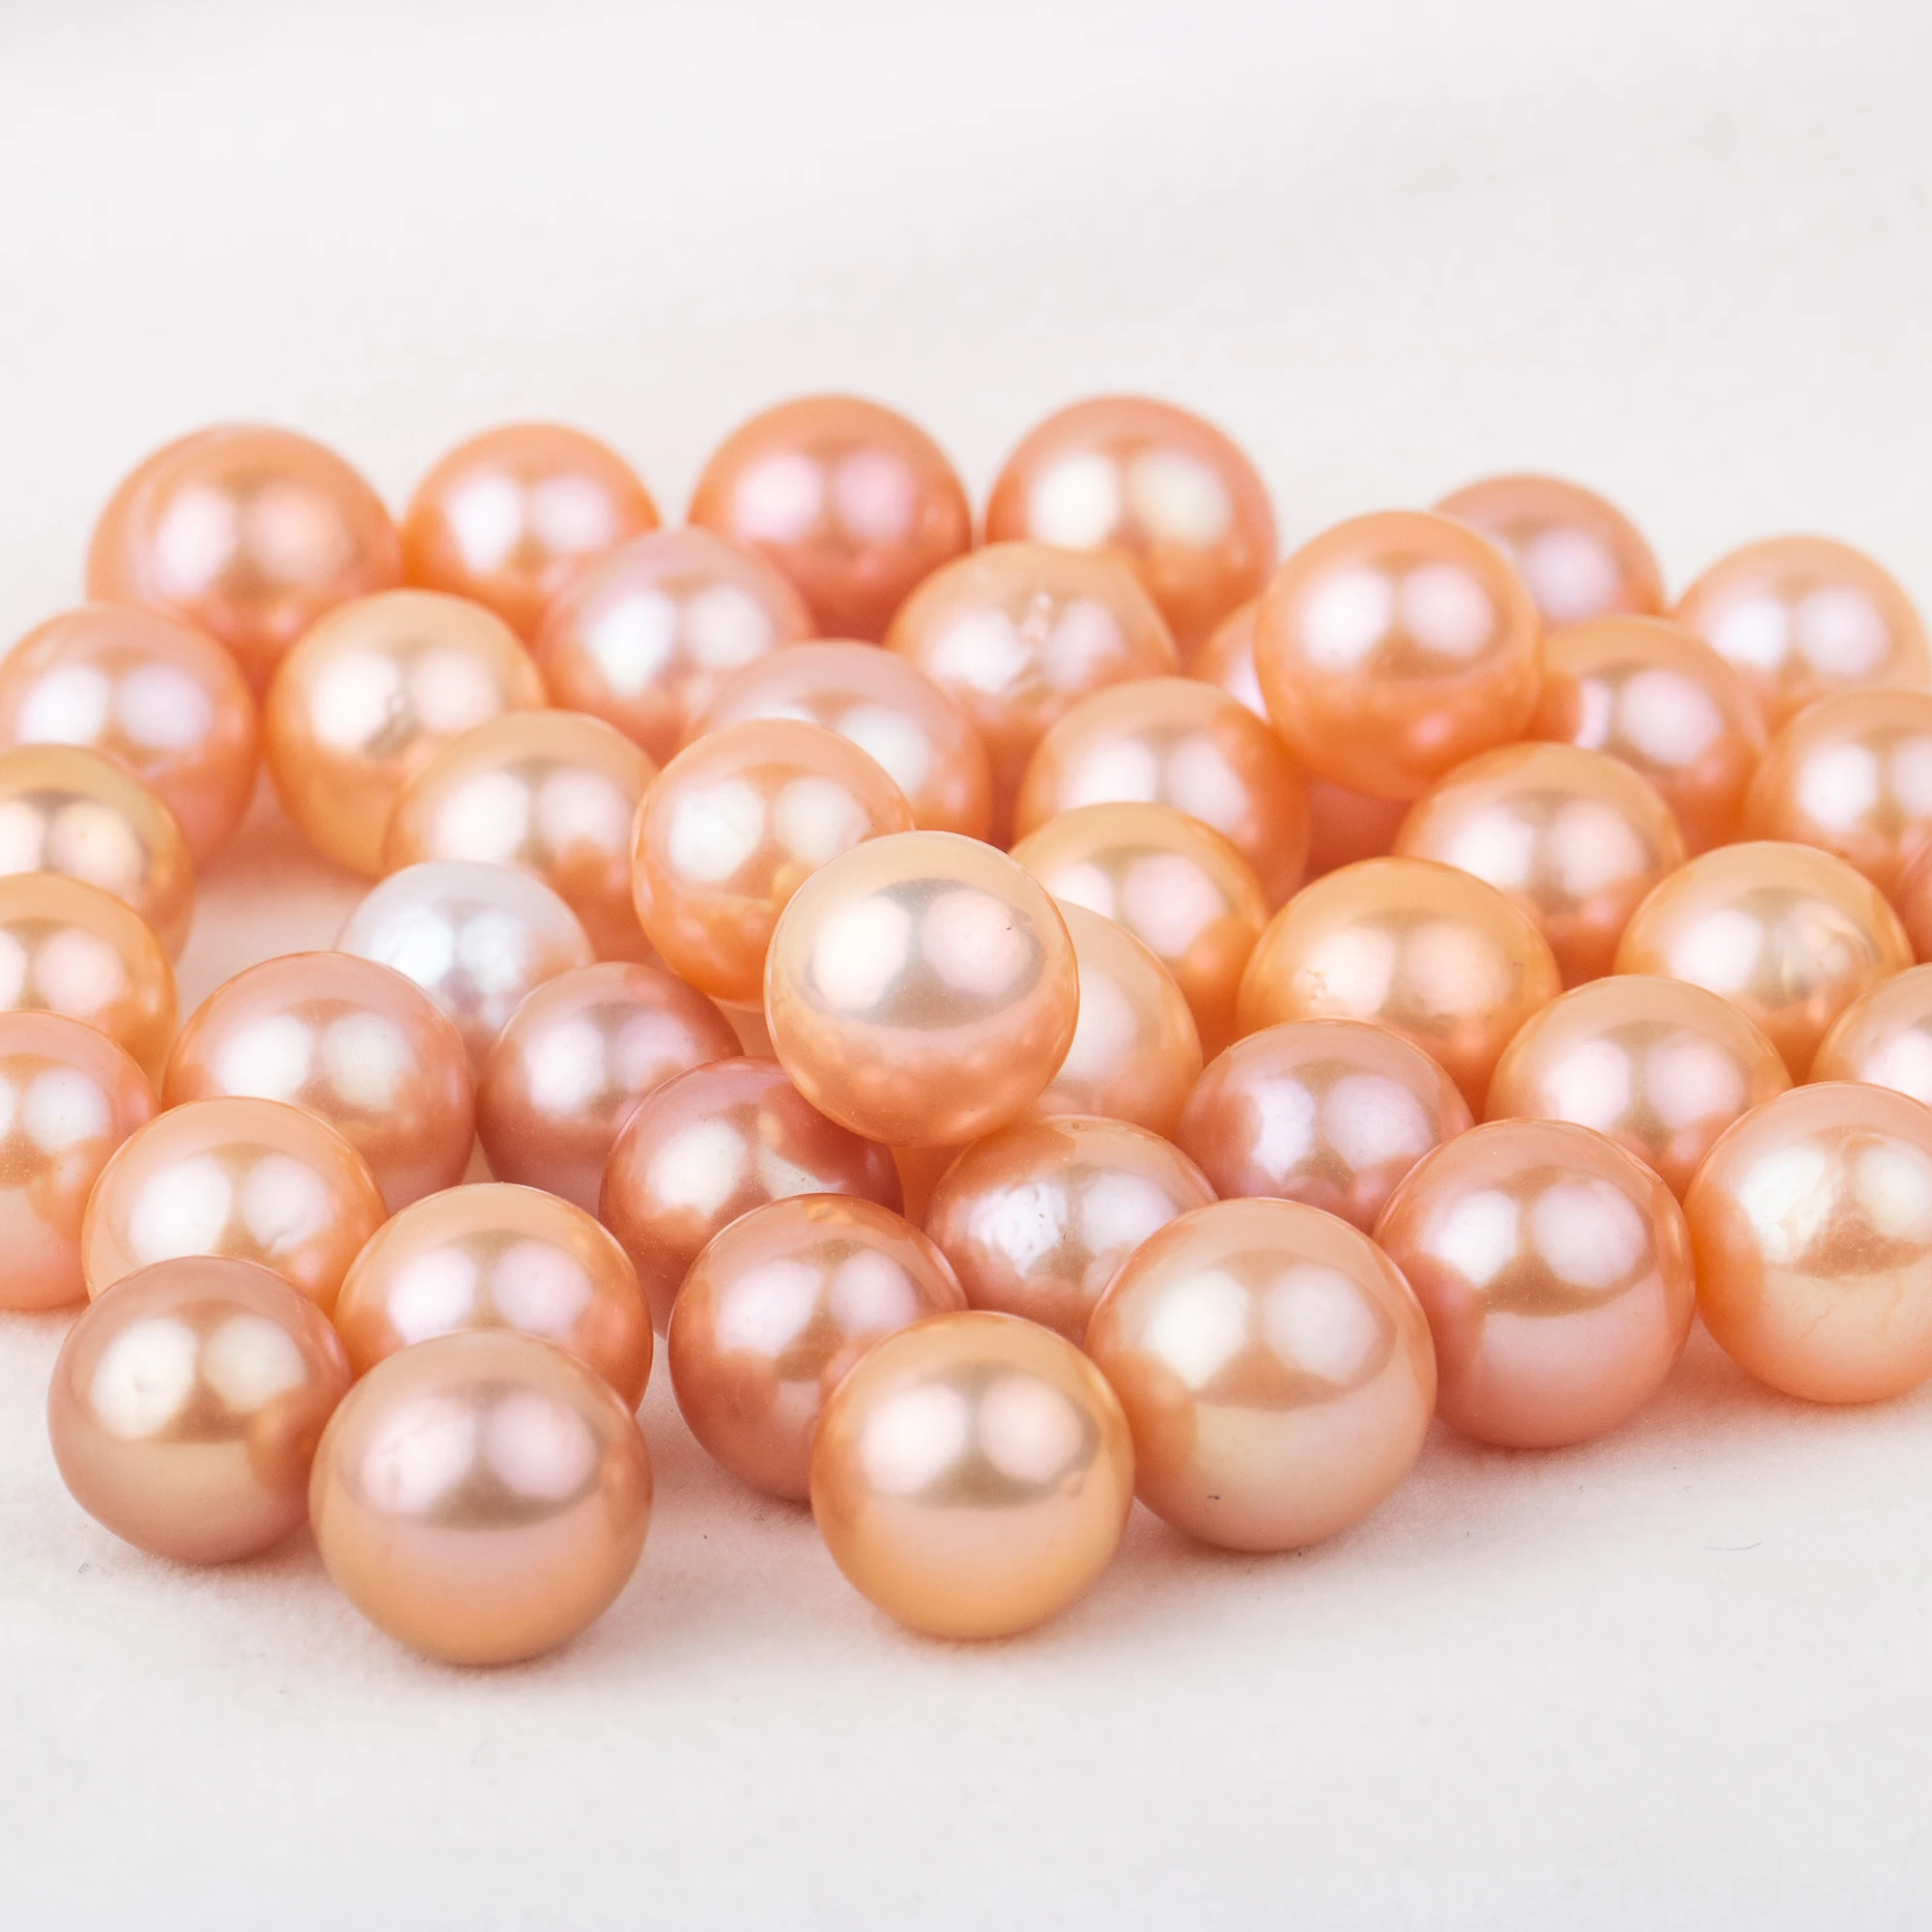 

9-12mm cultured orange Edison Pearl High quality loose freshwater pearl round shape